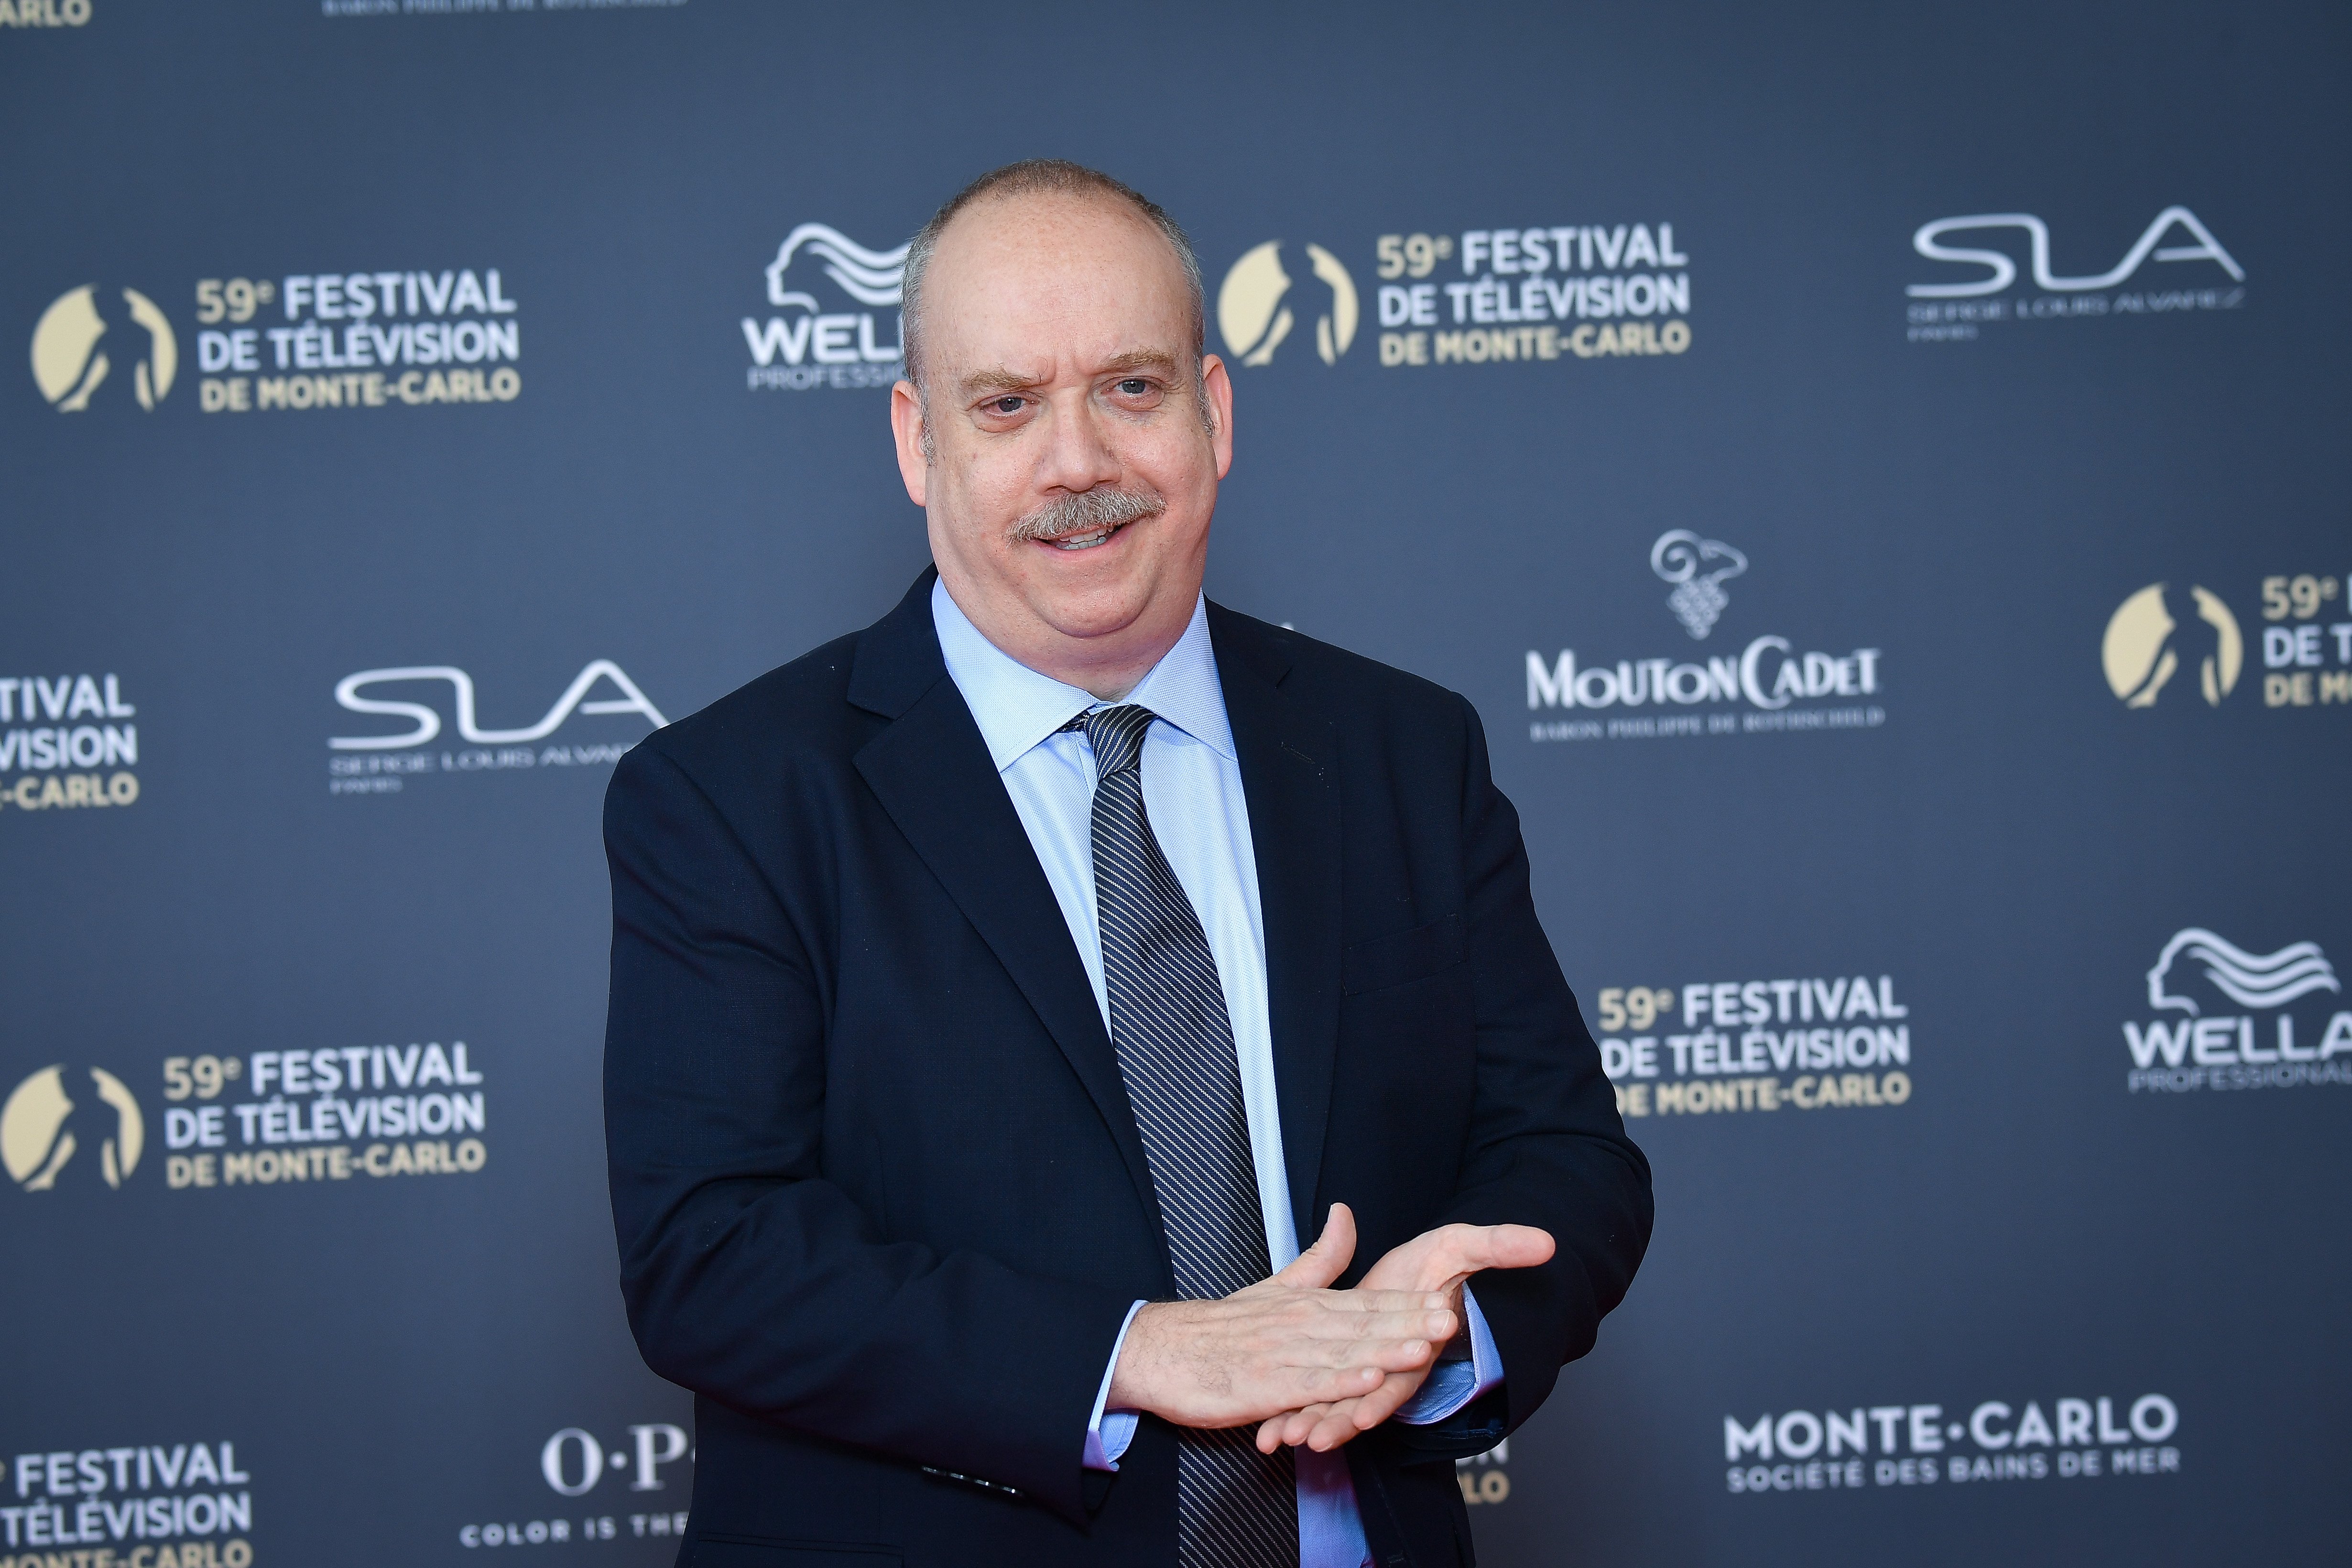 Paul Giamatti attends the opening ceremony of the 59th Monte Carlo TV Festival on June 14, 2019, in Monte-Carlo, Monaco. | Source: Getty Images